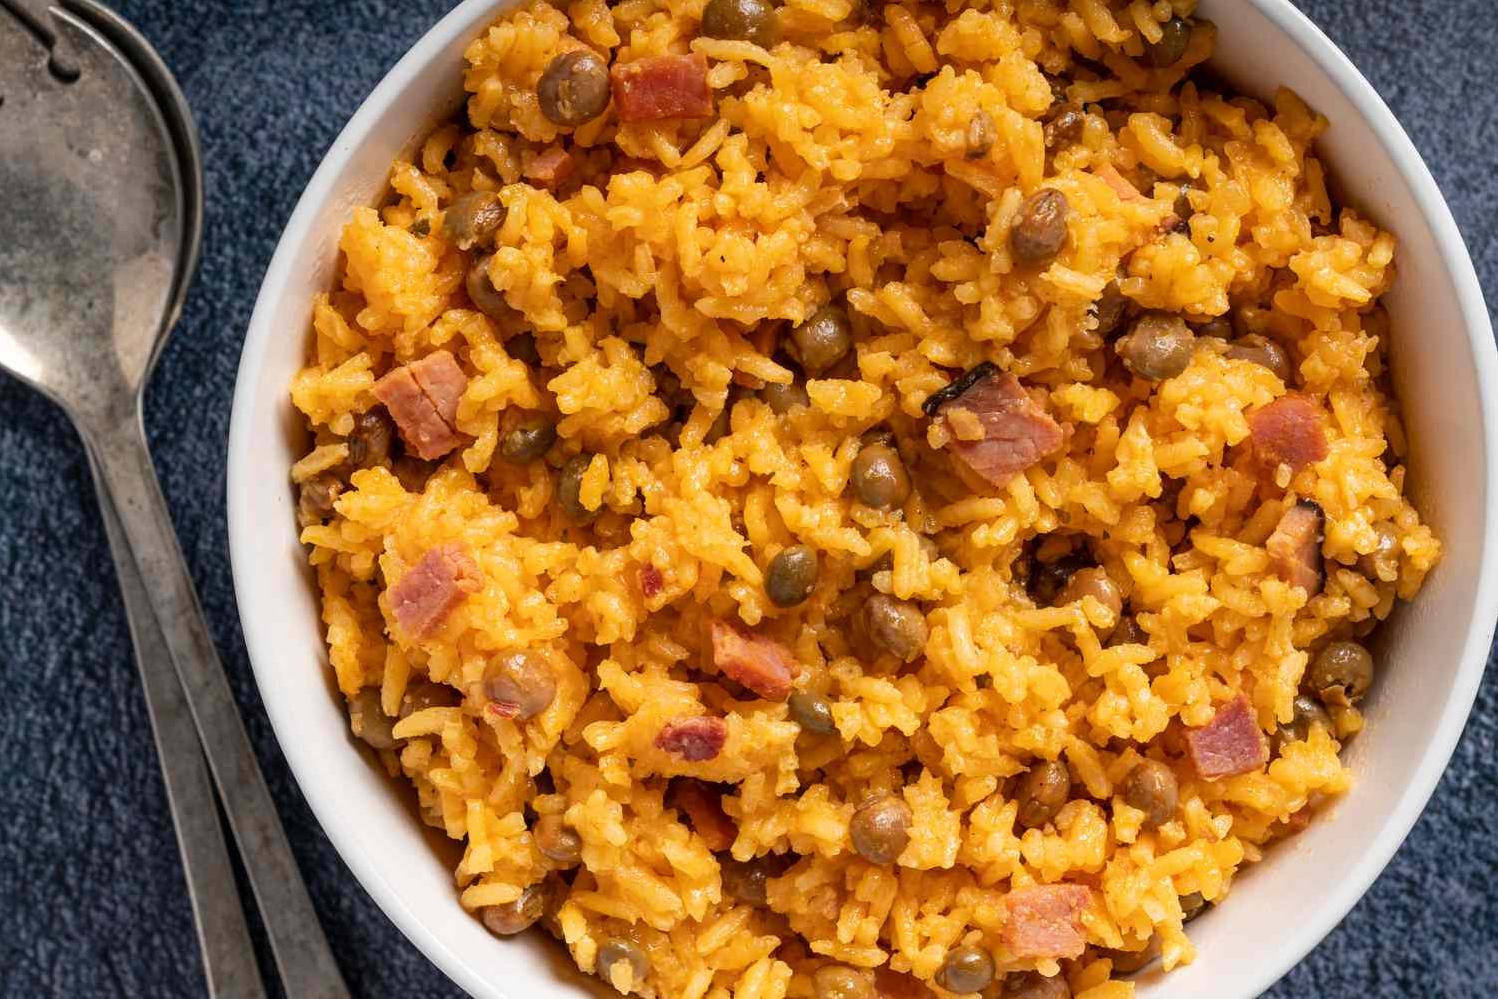  It's time to go on a flavorful journey to Latin America with this classic Puerto Rican dish.